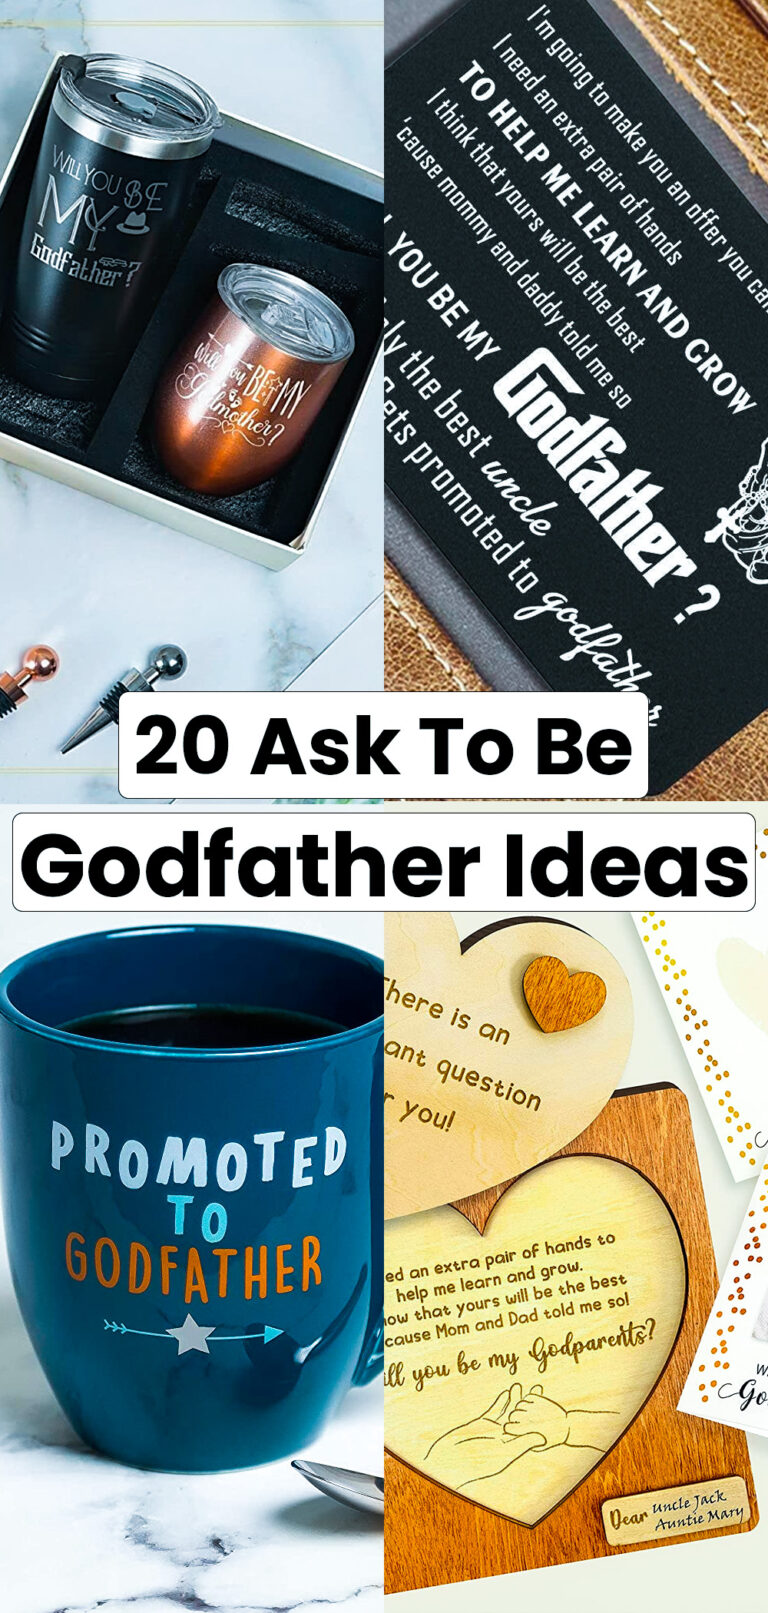 18 Ask to Be Godfather Ideas